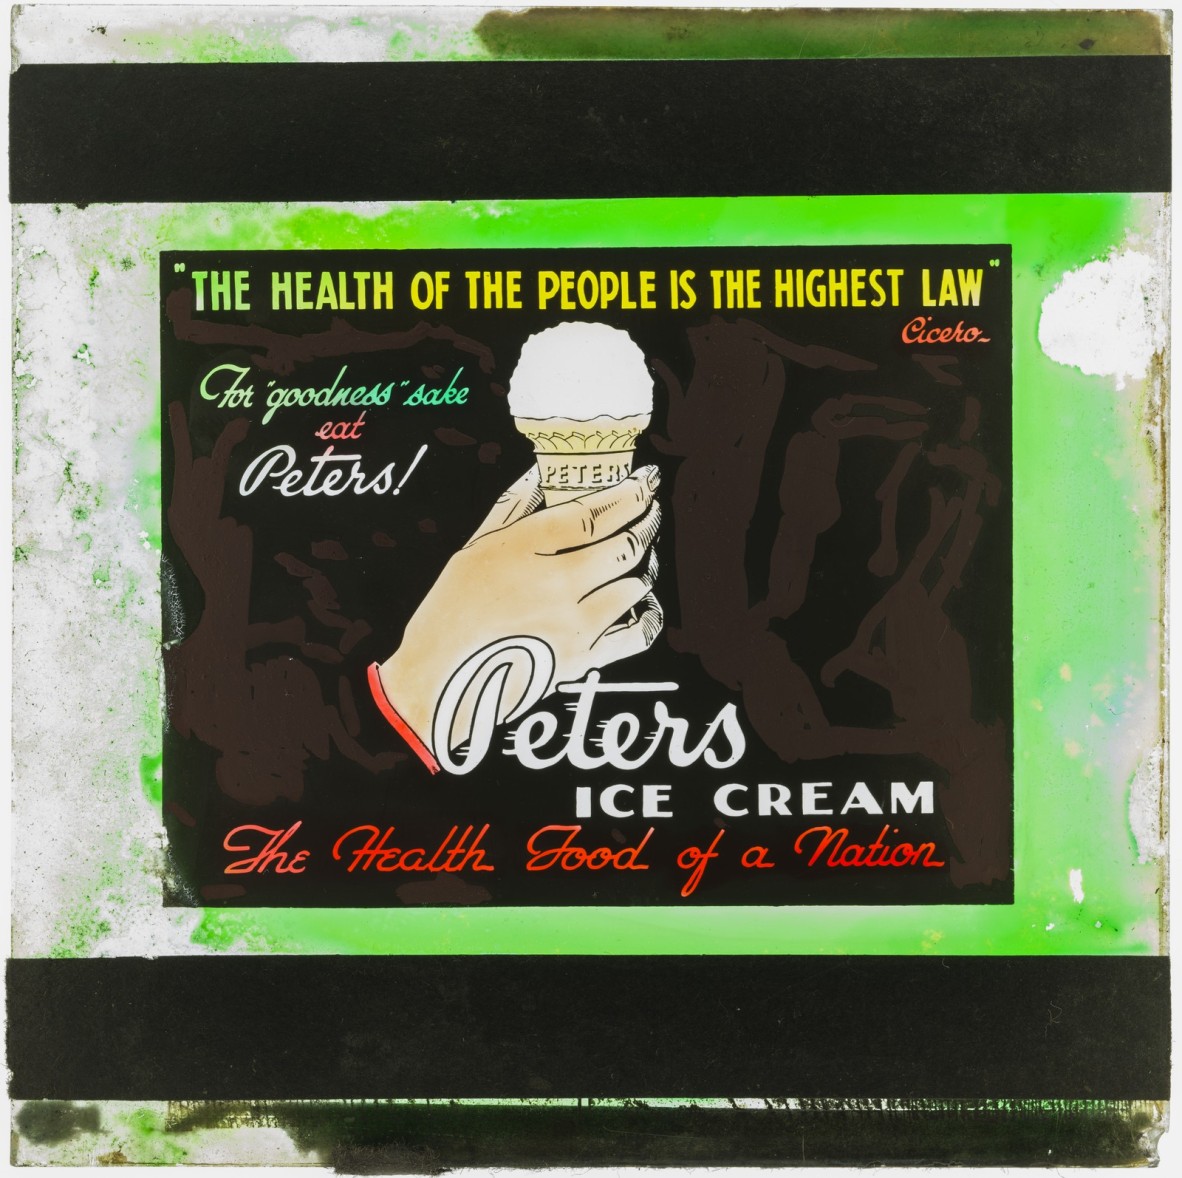 A hand holding an ice cream in an advertisement for Peters Ice Cream